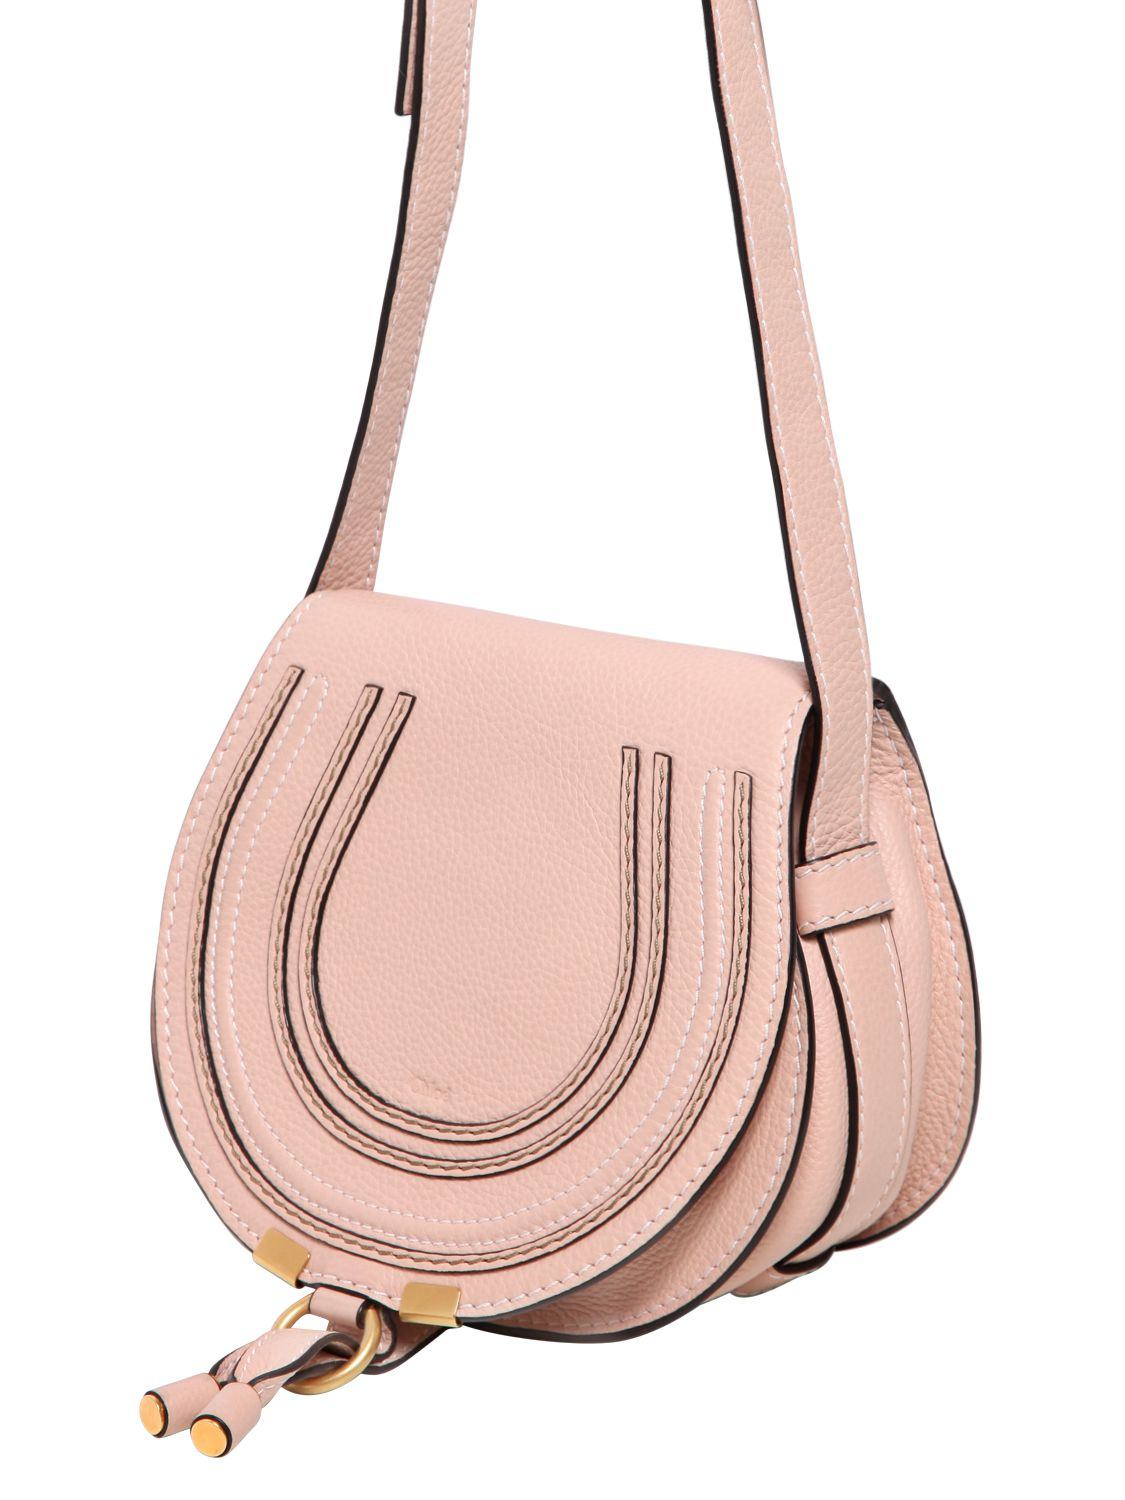 Lyst - Chloé Small Marcie Leather Crossbody Bag in Pink